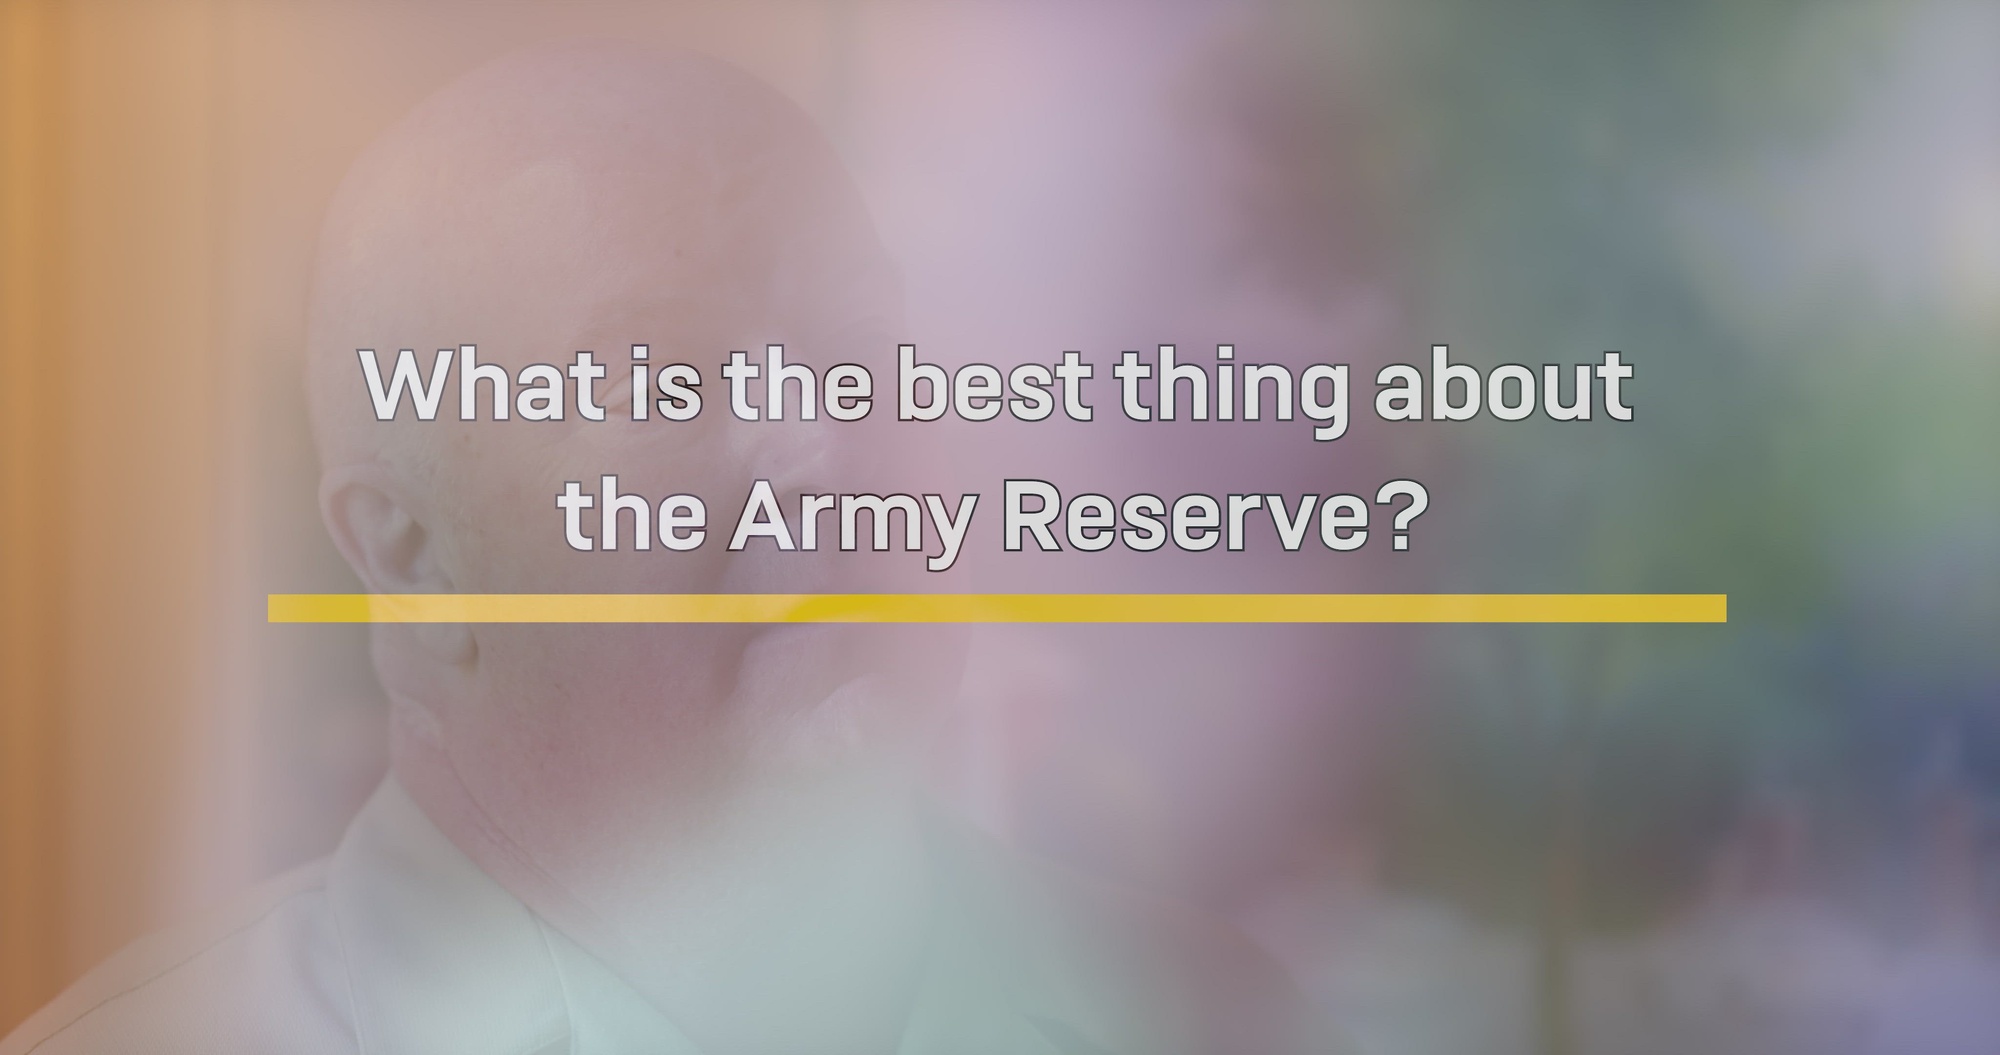 Army Reserve Ambassador Jim Bernet tells us what he thinks the best thing about the Army Reserve is.